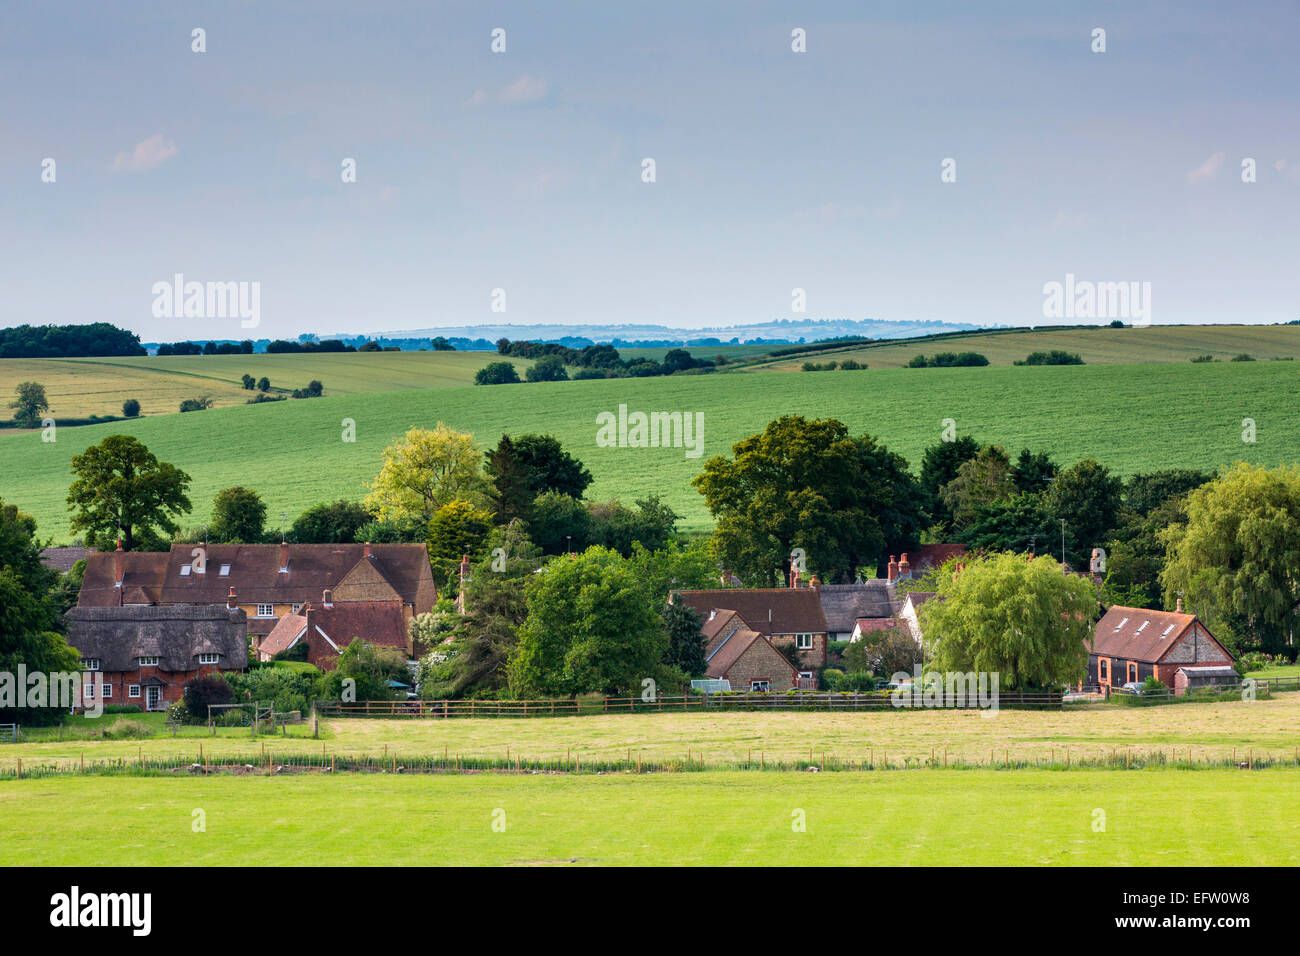 Distant view of traditional English village in rural landscape, Oxfordshire, UK Stock Photo